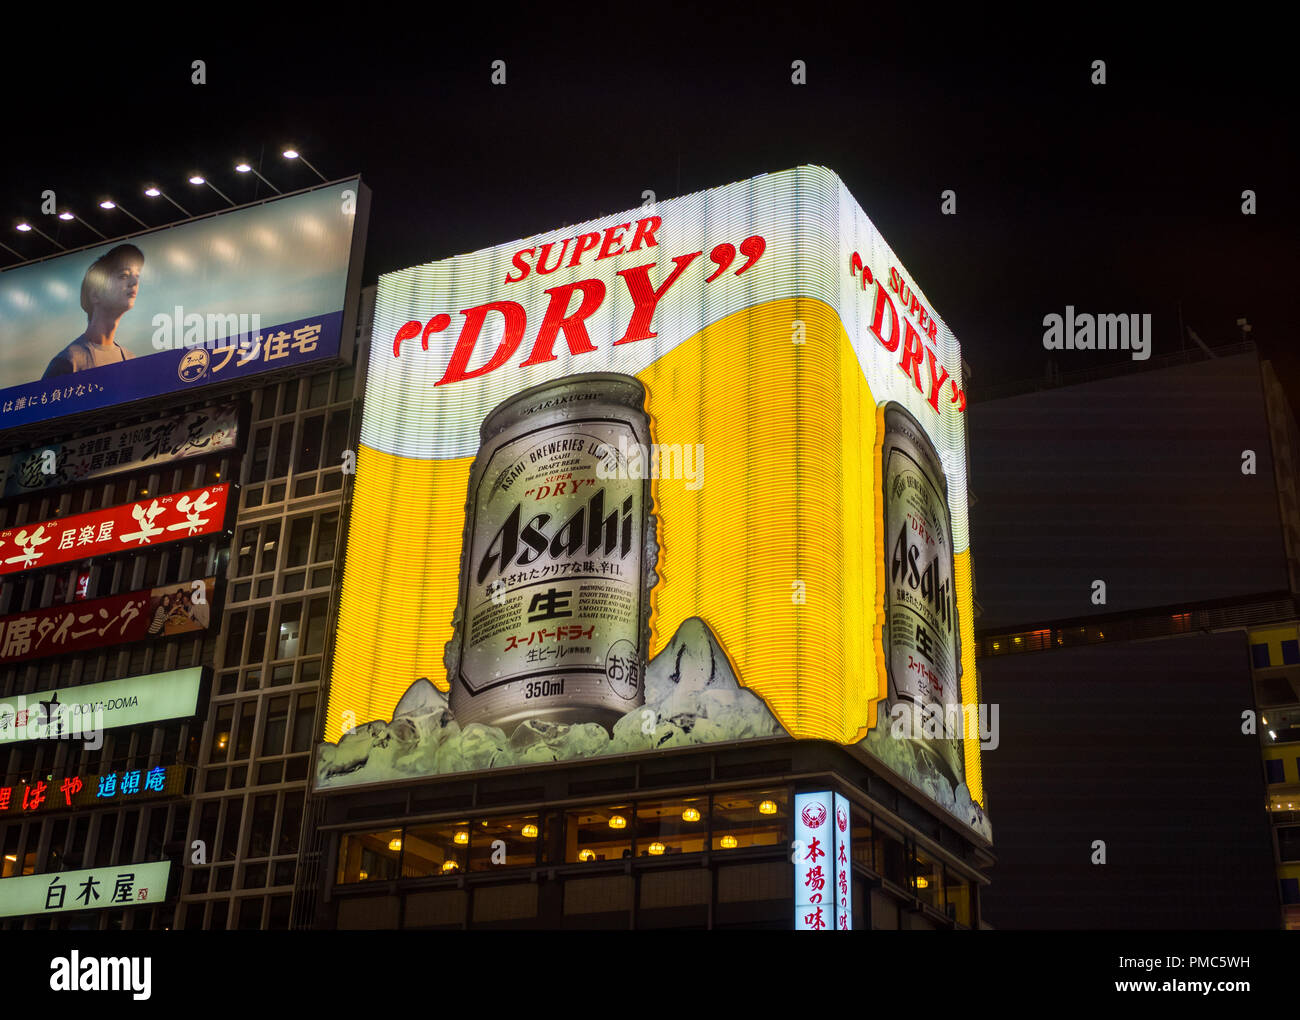 The famous Asahi Super Dry beer neon sign in the Dotonbori district of Osaka, Japan. Stock Photo